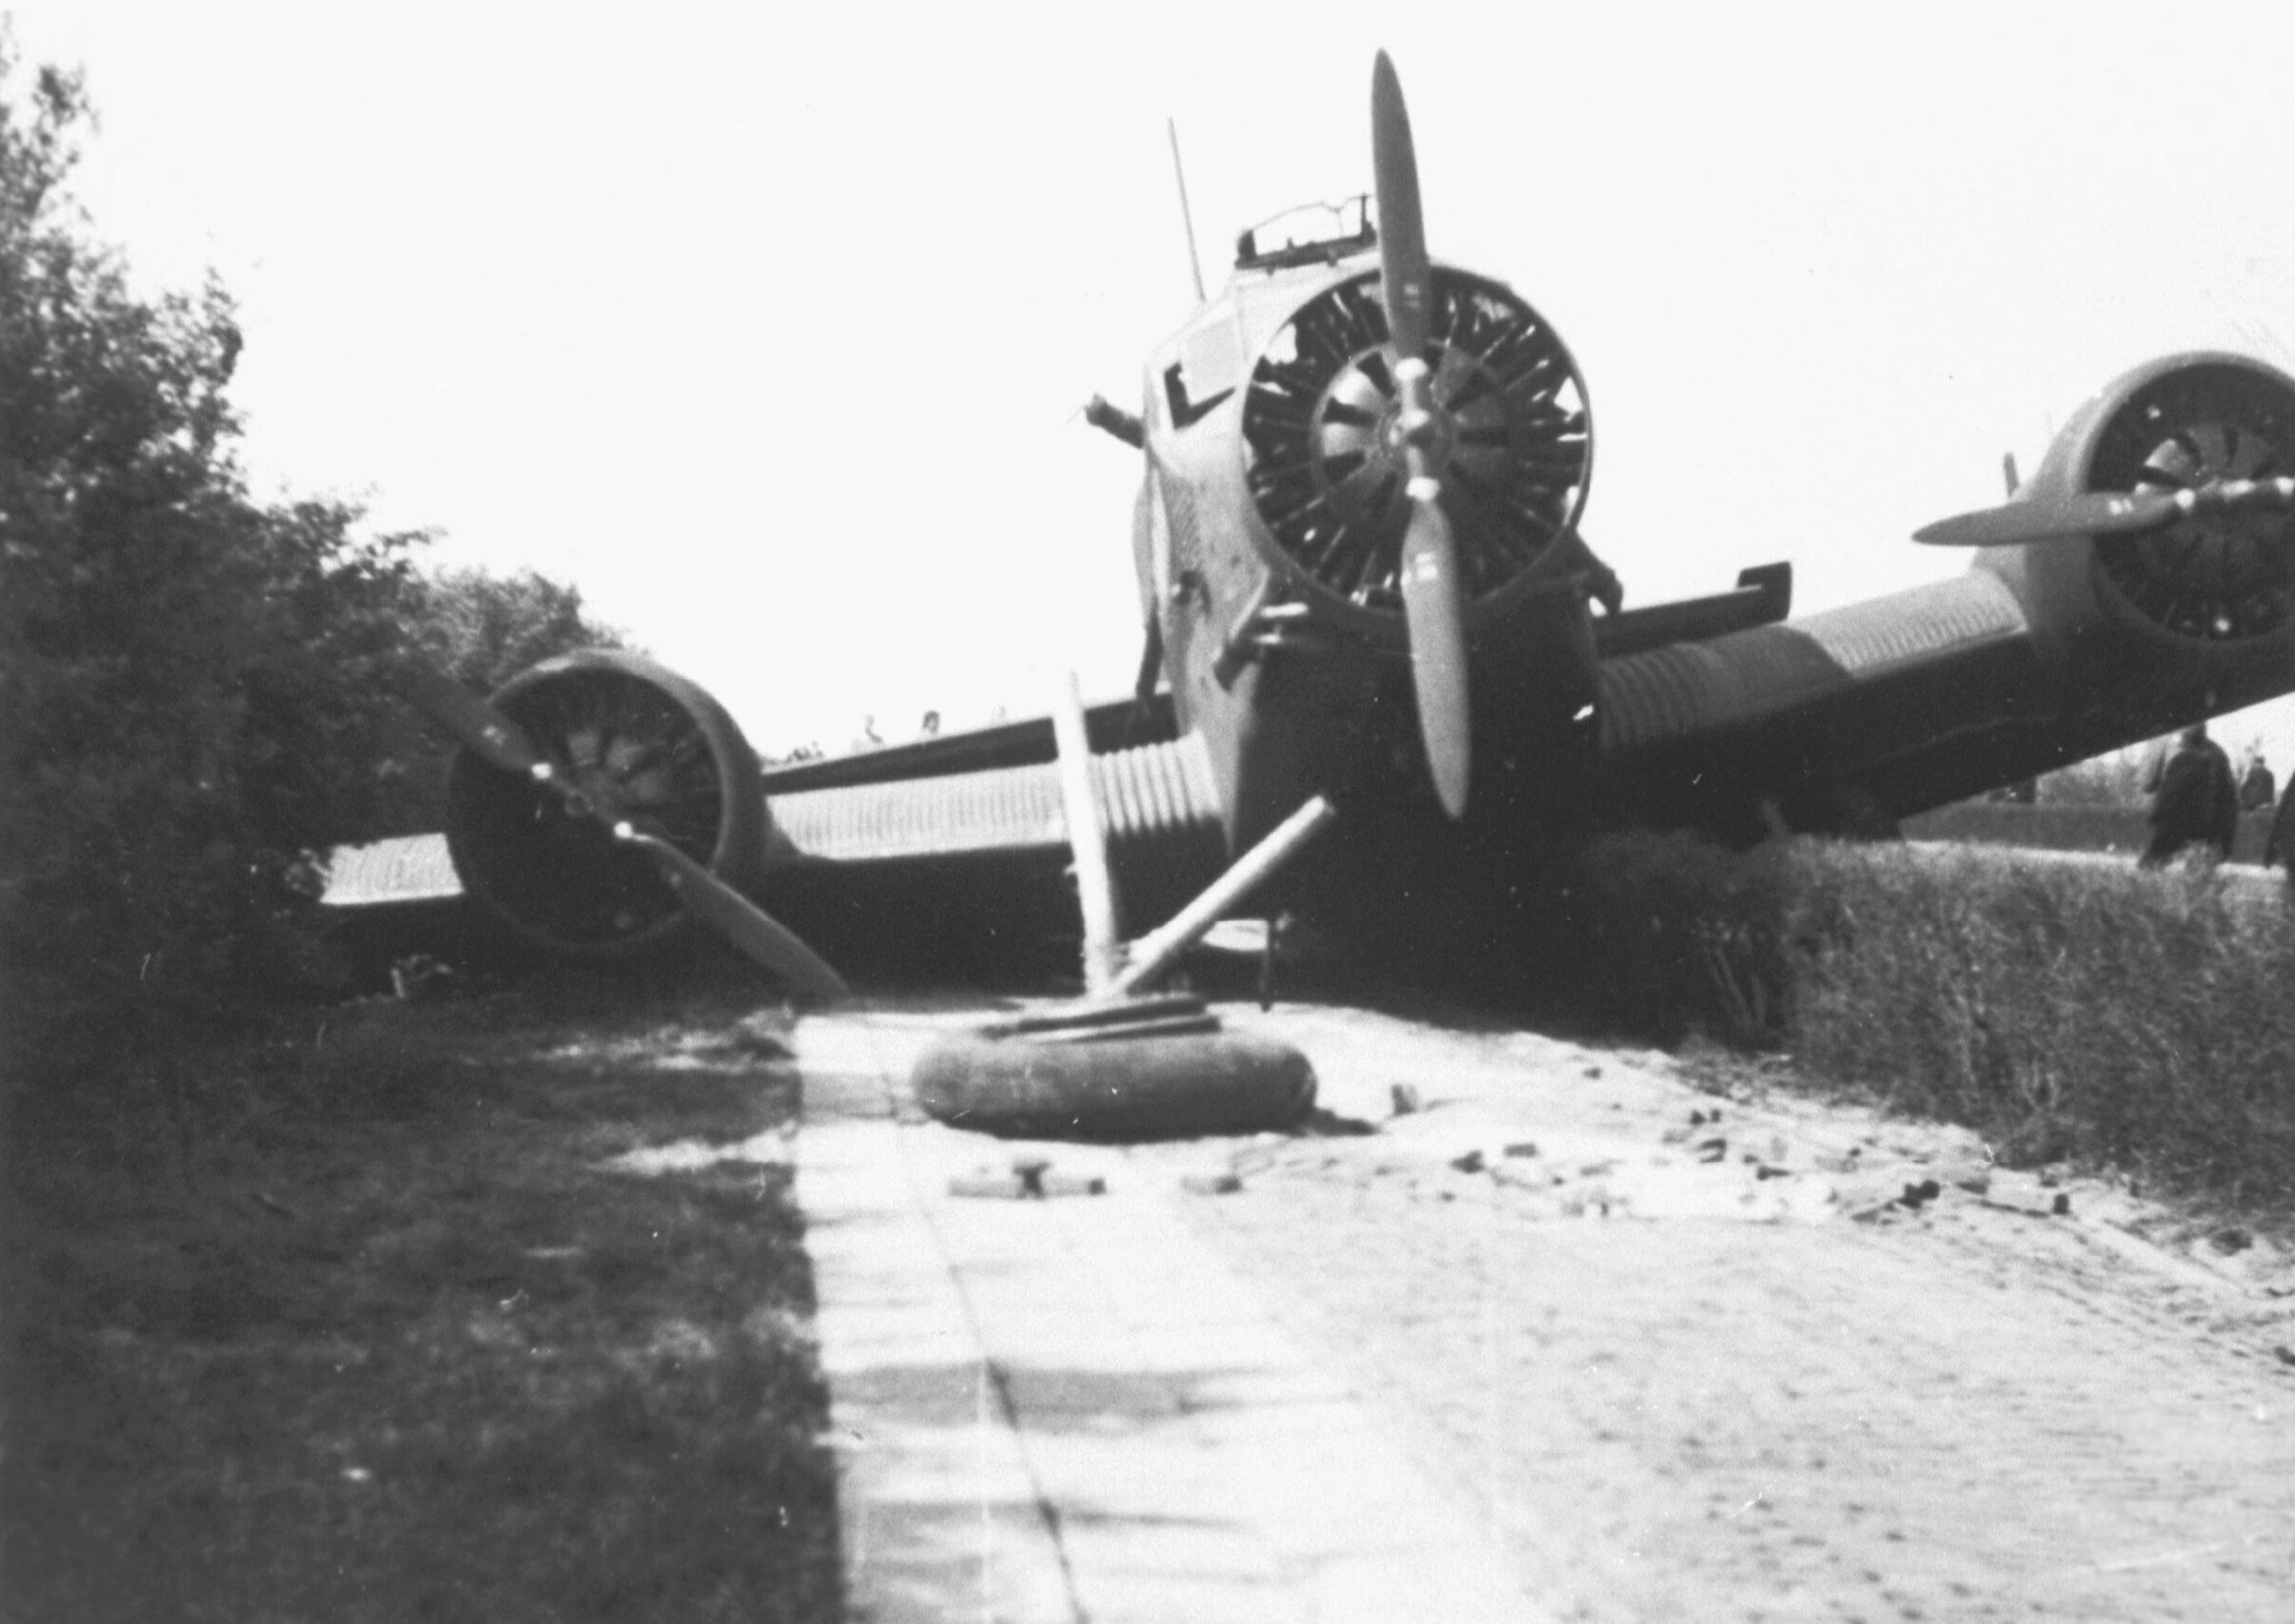 Fall Gelb Junkers Ju 52 3m shot down over Holland May 1940 NIOD2